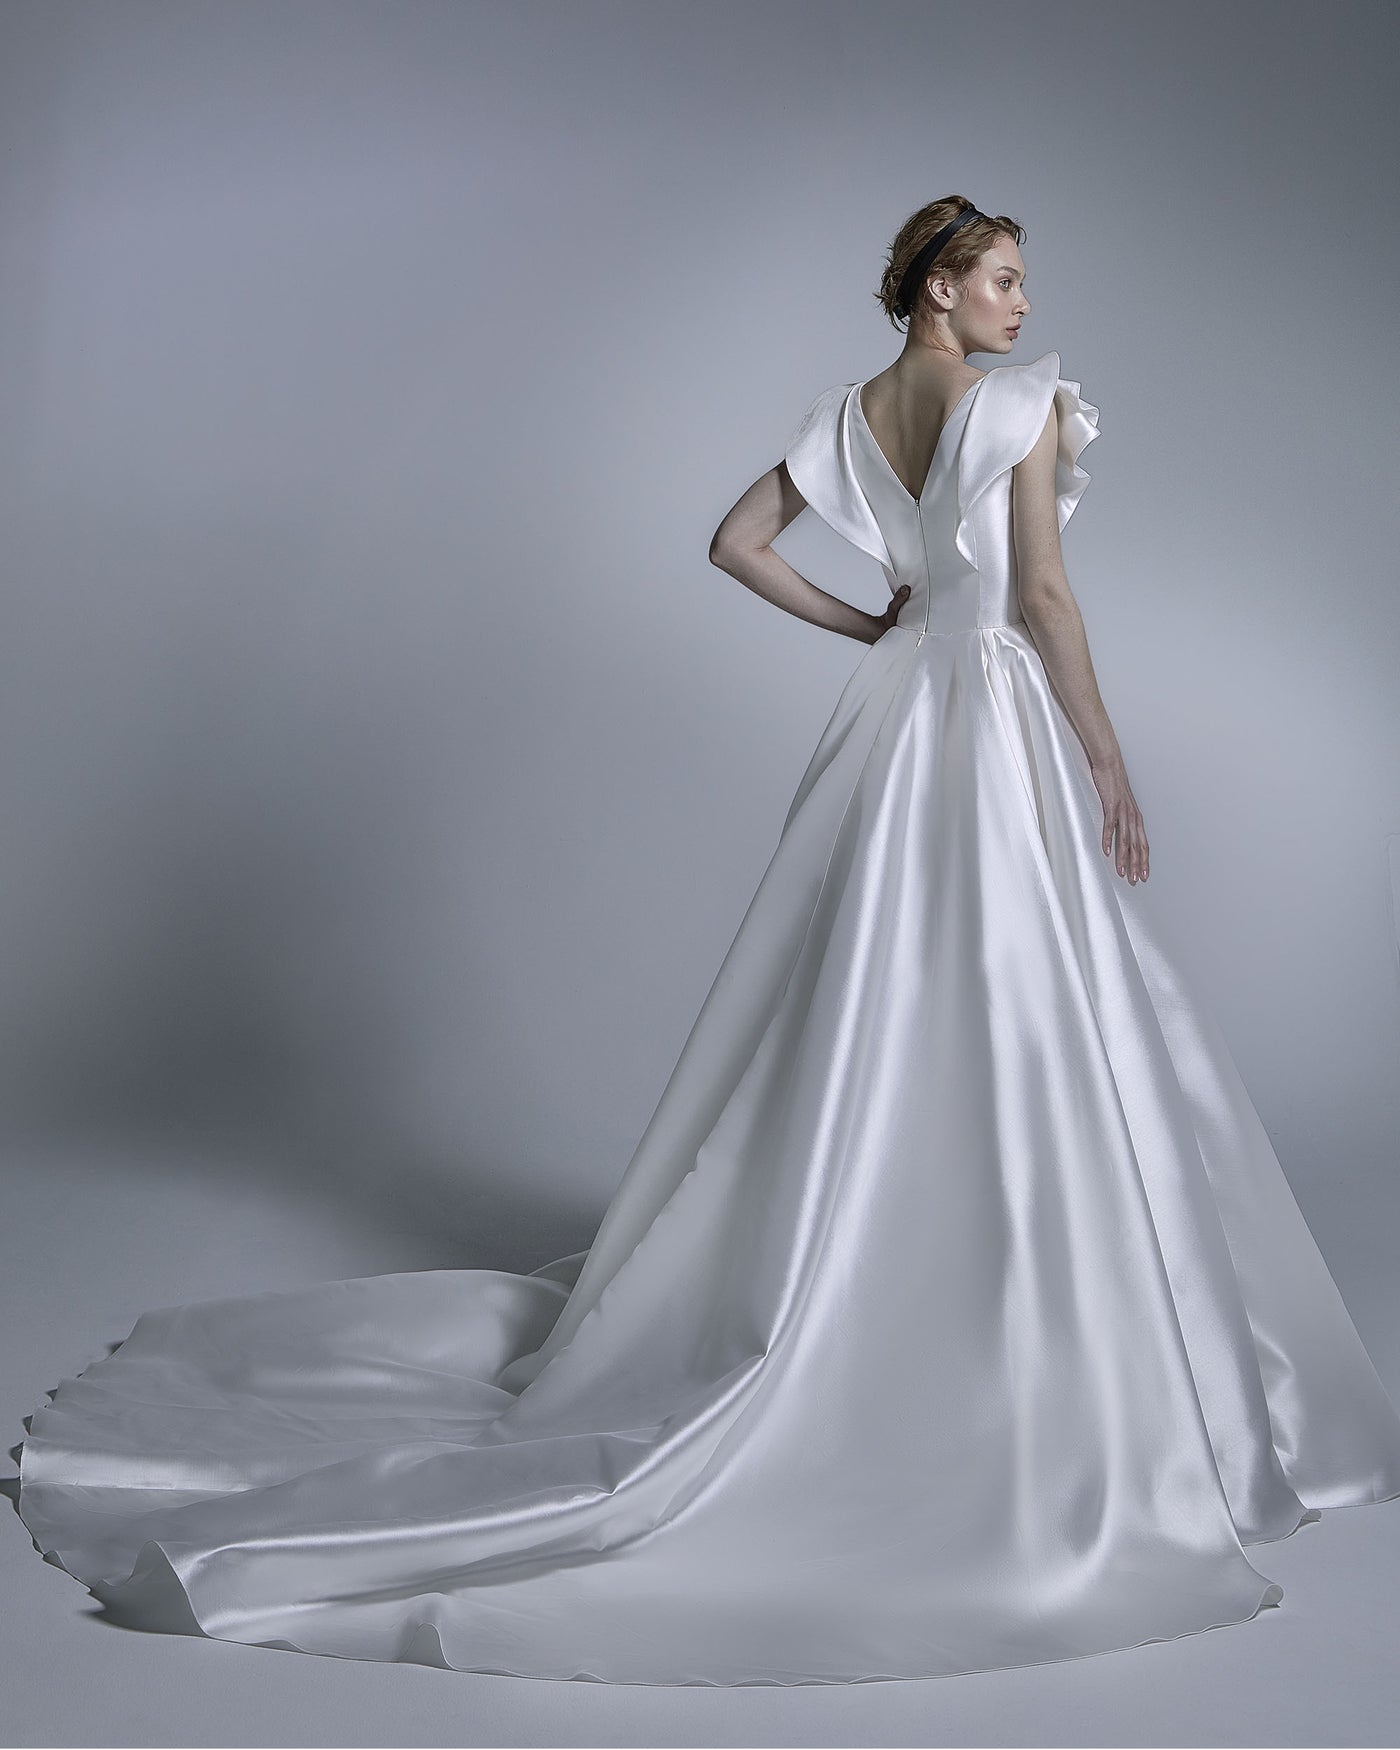 Plunging V-Neckline With Drapery Details Gown